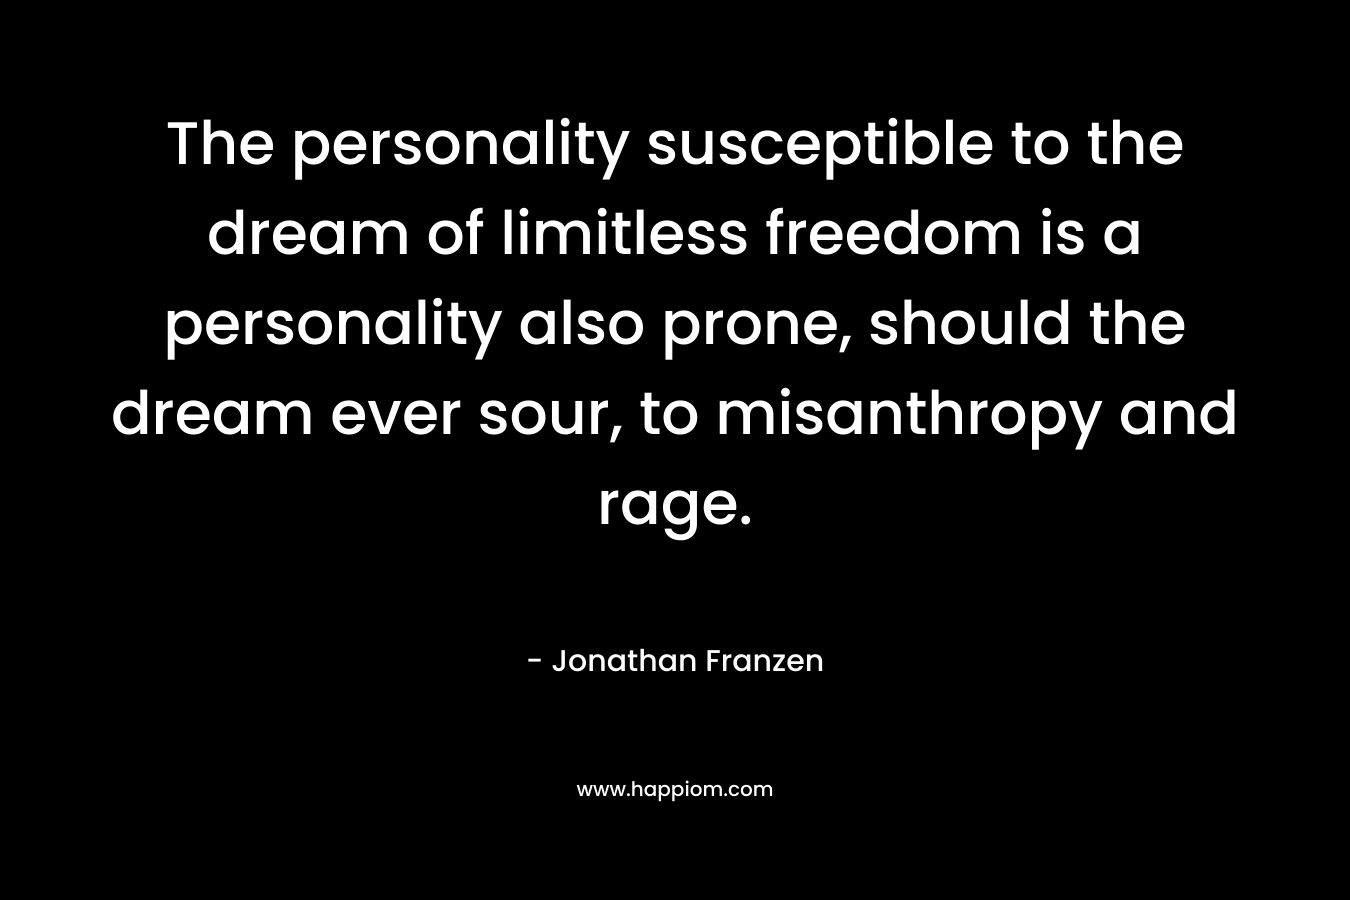 The personality susceptible to the dream of limitless freedom is a personality also prone, should the dream ever sour, to misanthropy and rage. – Jonathan Franzen